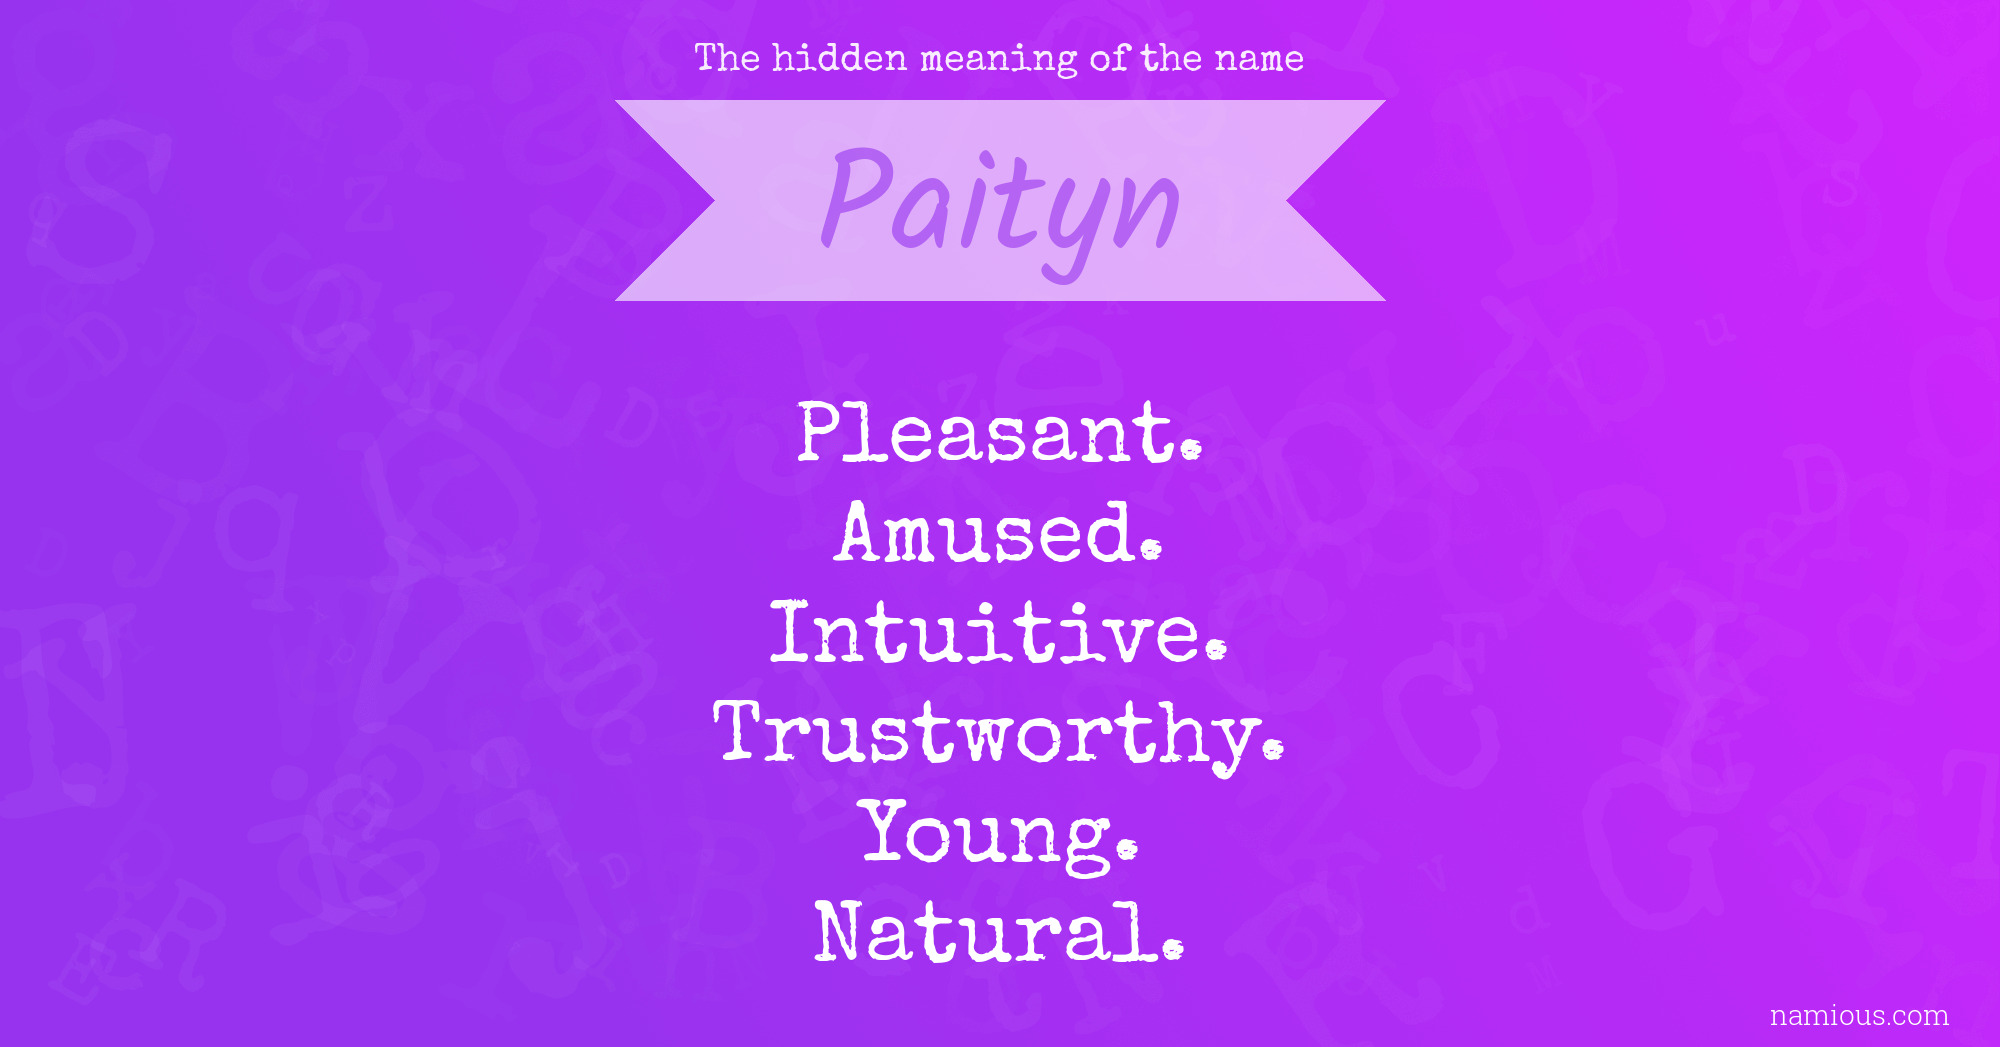 The hidden meaning of the name Paityn